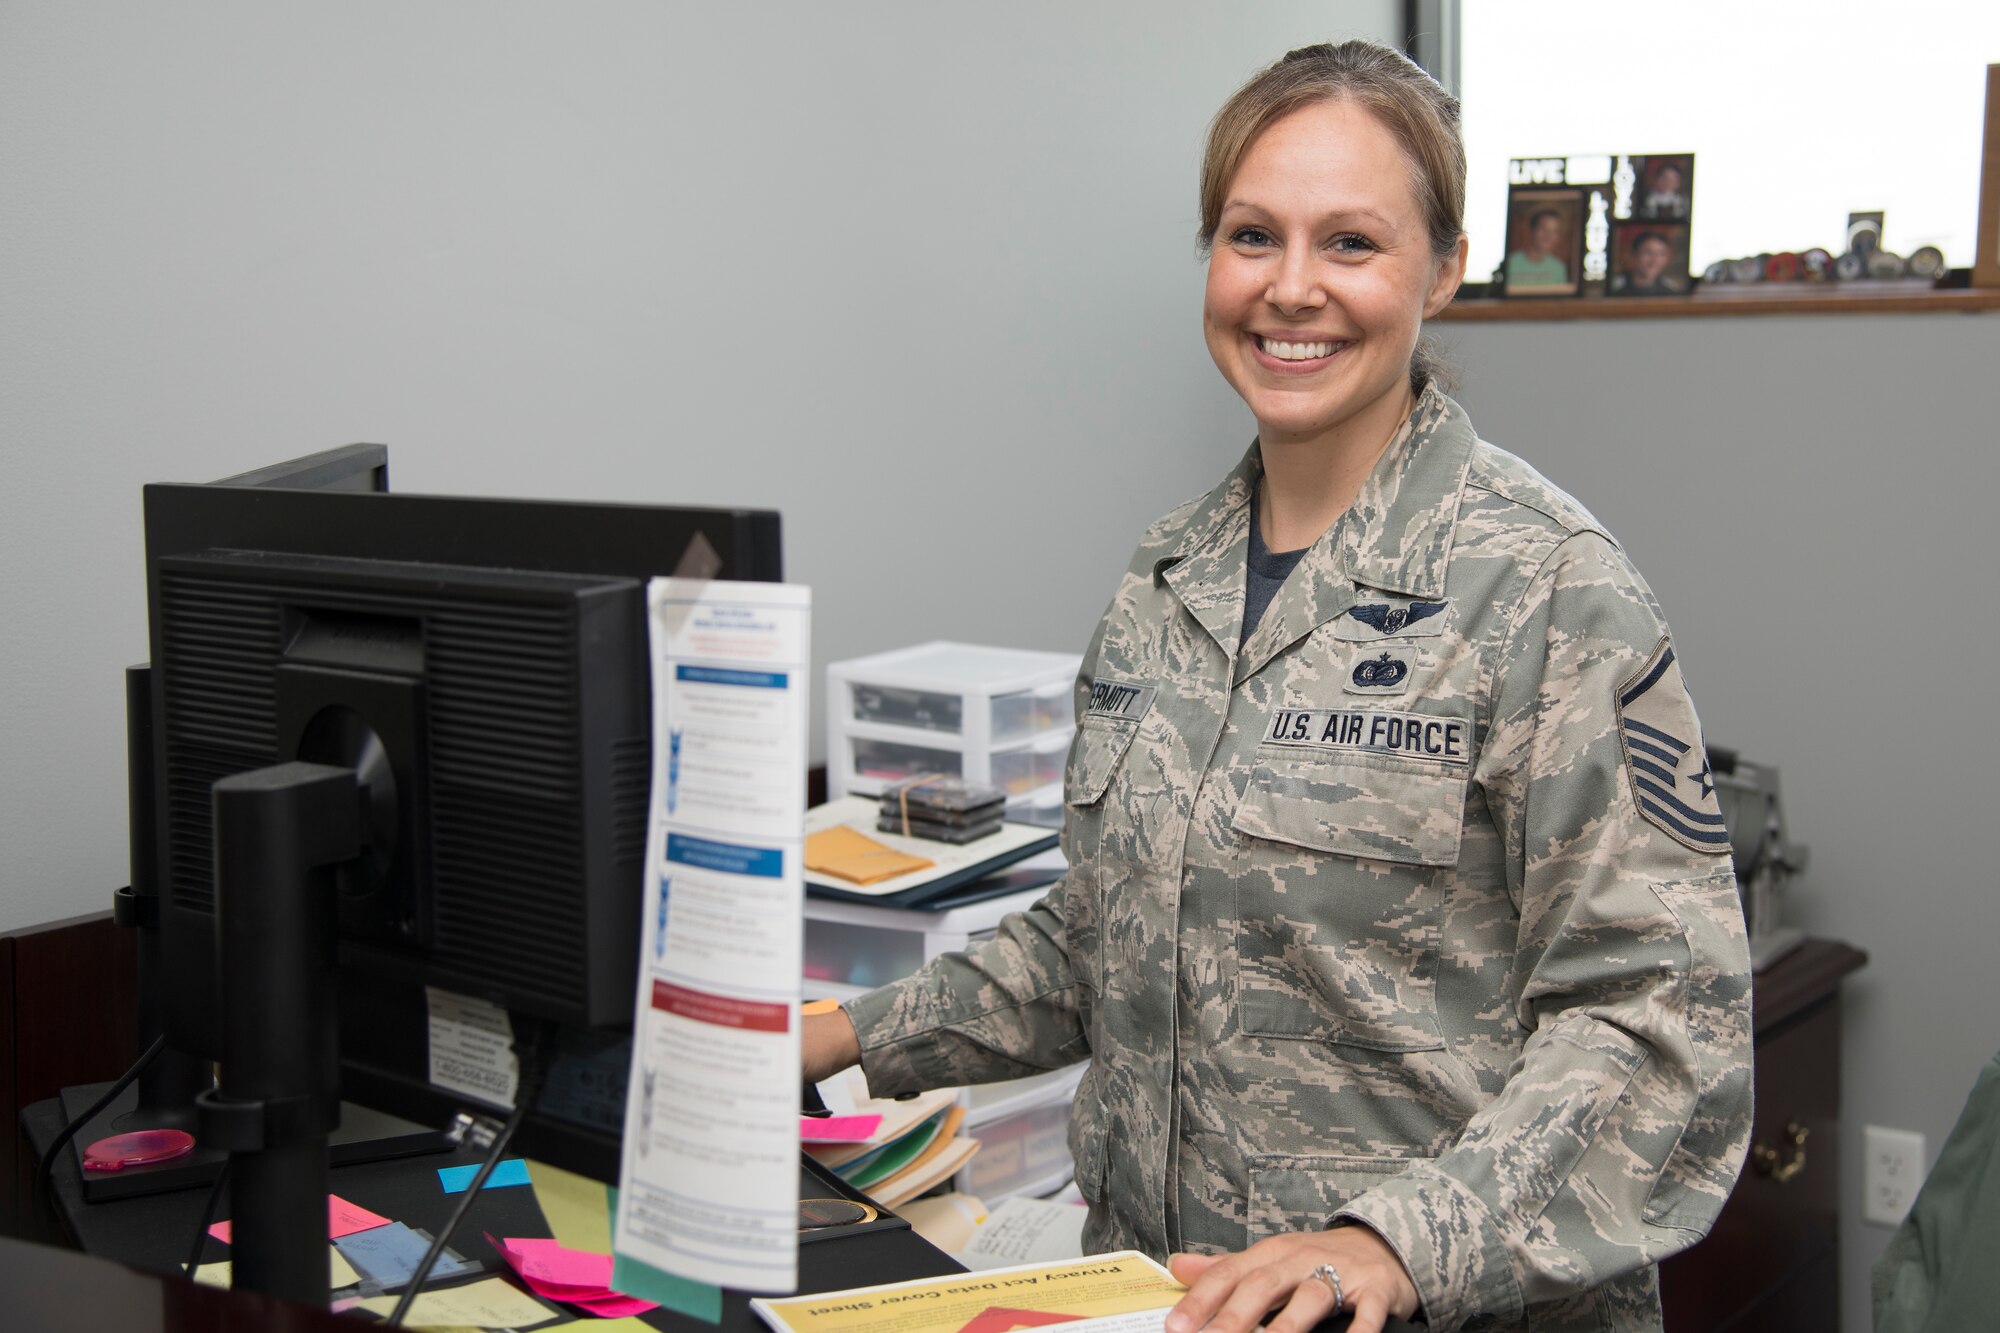 Master Sgt. Kelly McDermott, an administration Airmen with the 105th Airlift Wing, joined the Air National Guard in 1996, originally as a loadmaster.